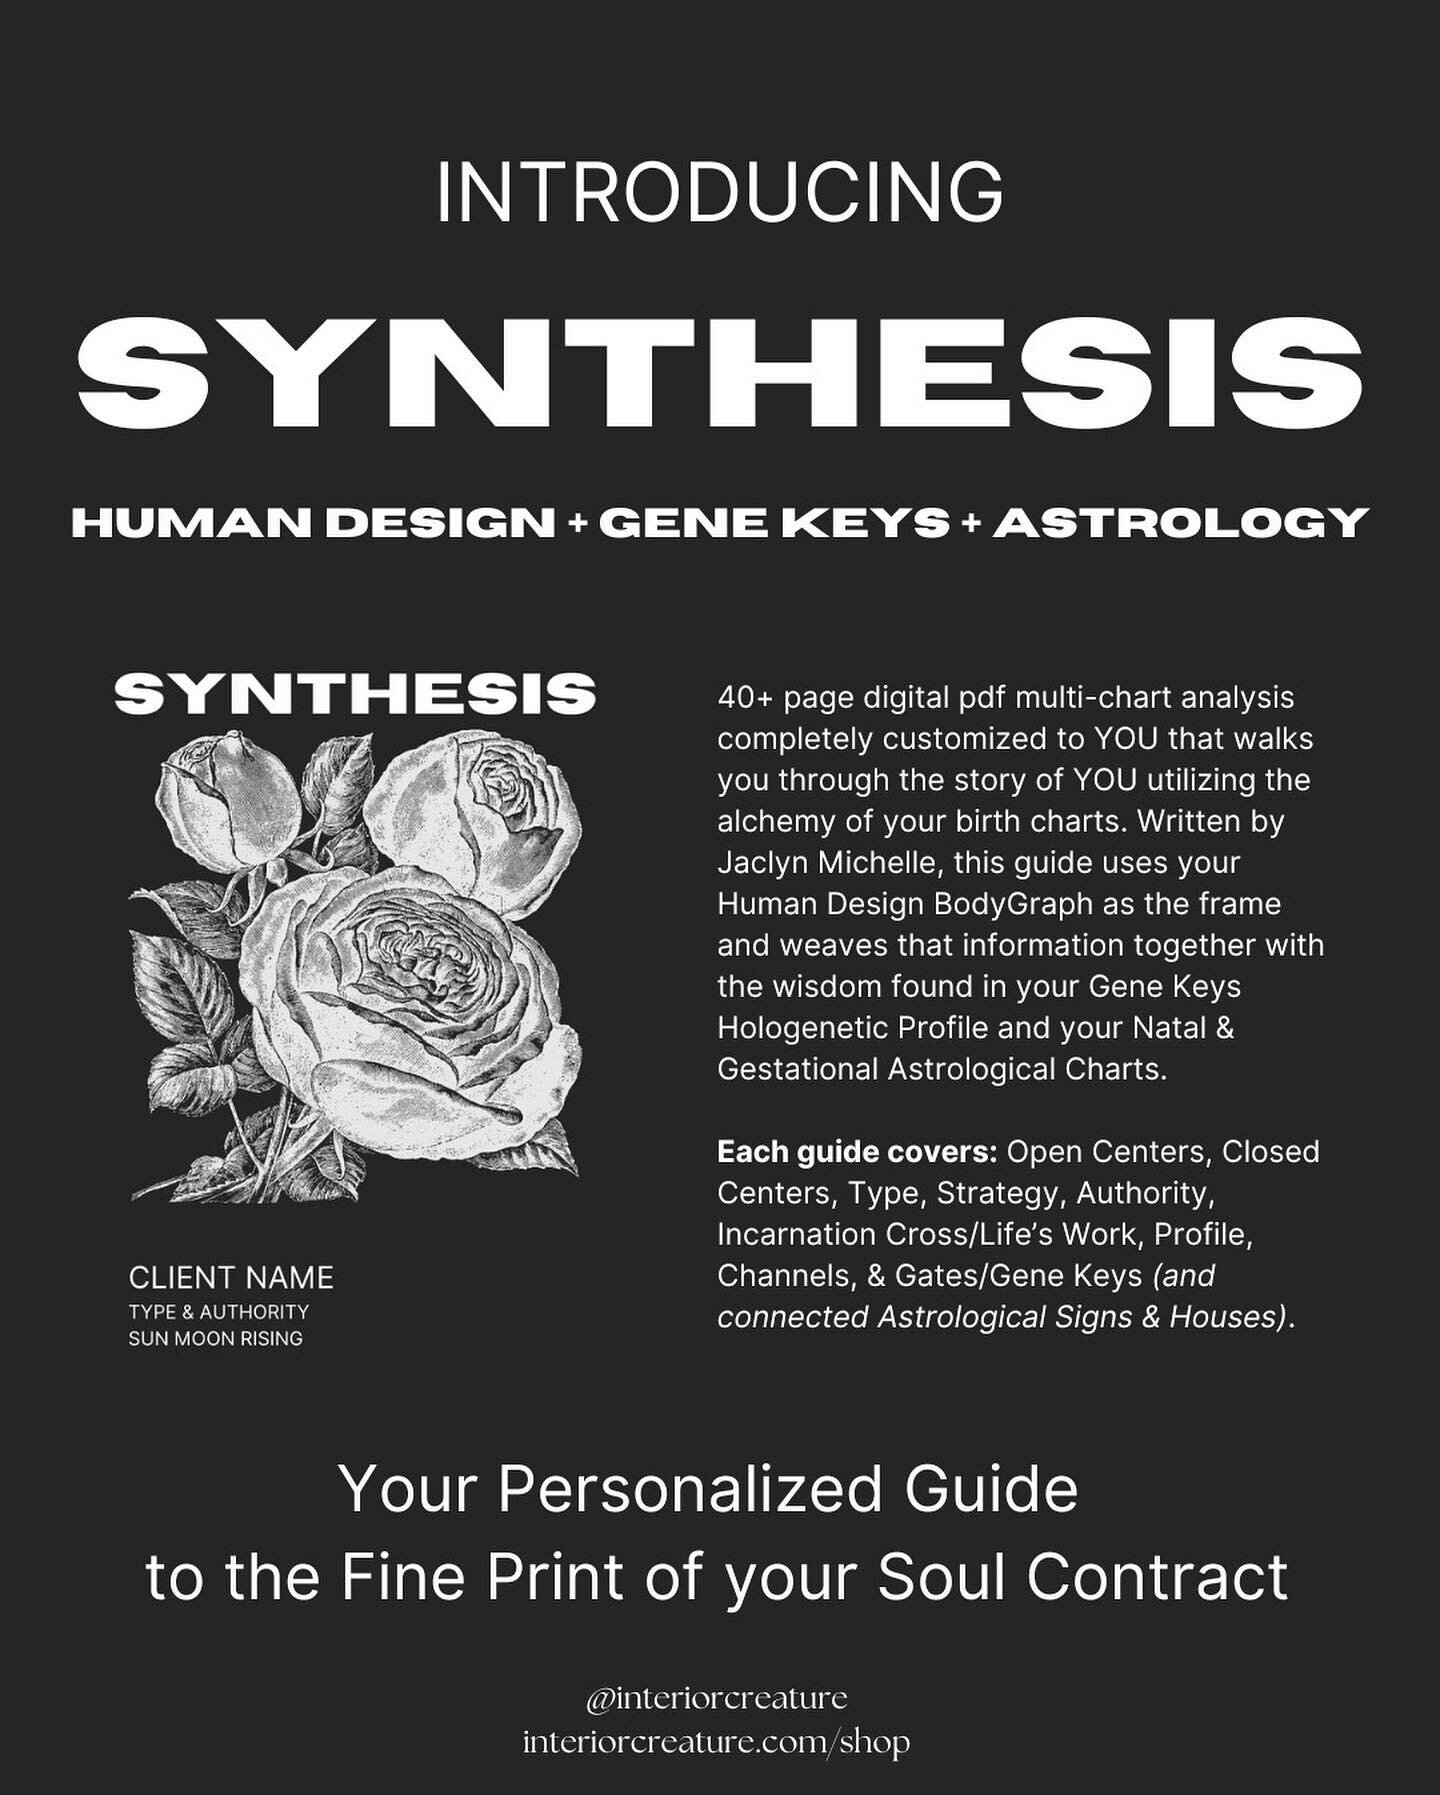 INTRODUCING SYNTHESIS
A completely customized, multi-chart analysis guide that walks you through the story of YOU utilizing the alchemy of your birth charts. Written by yours truly in practical, accessible, and, dare I say humorous language, this gui